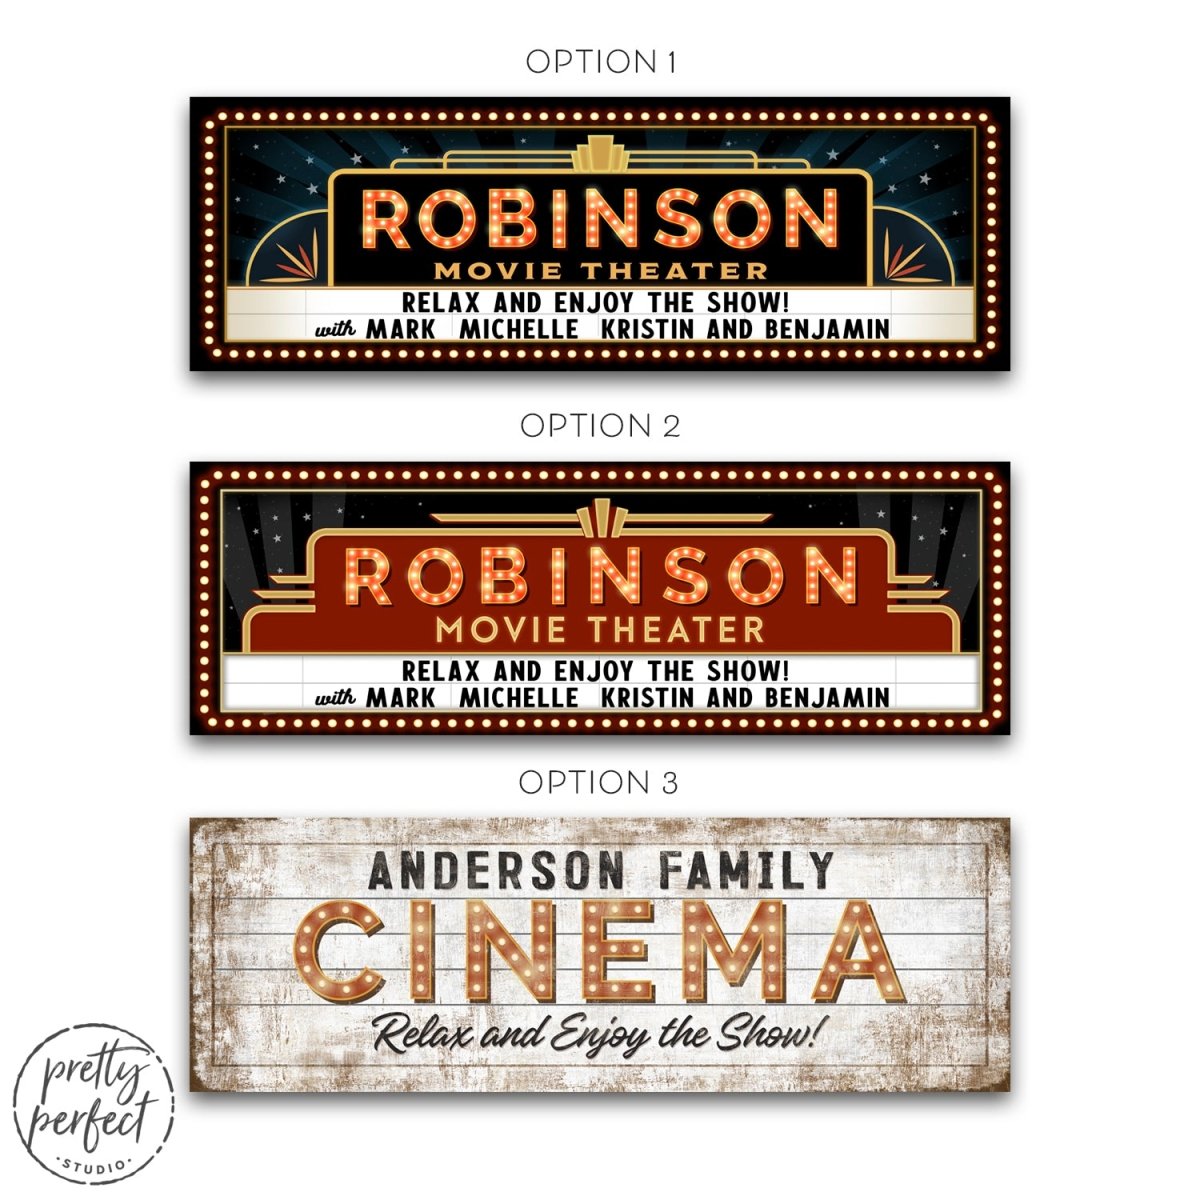 Personalized Theater and Lounge Sign Family Name Sign Movie Room